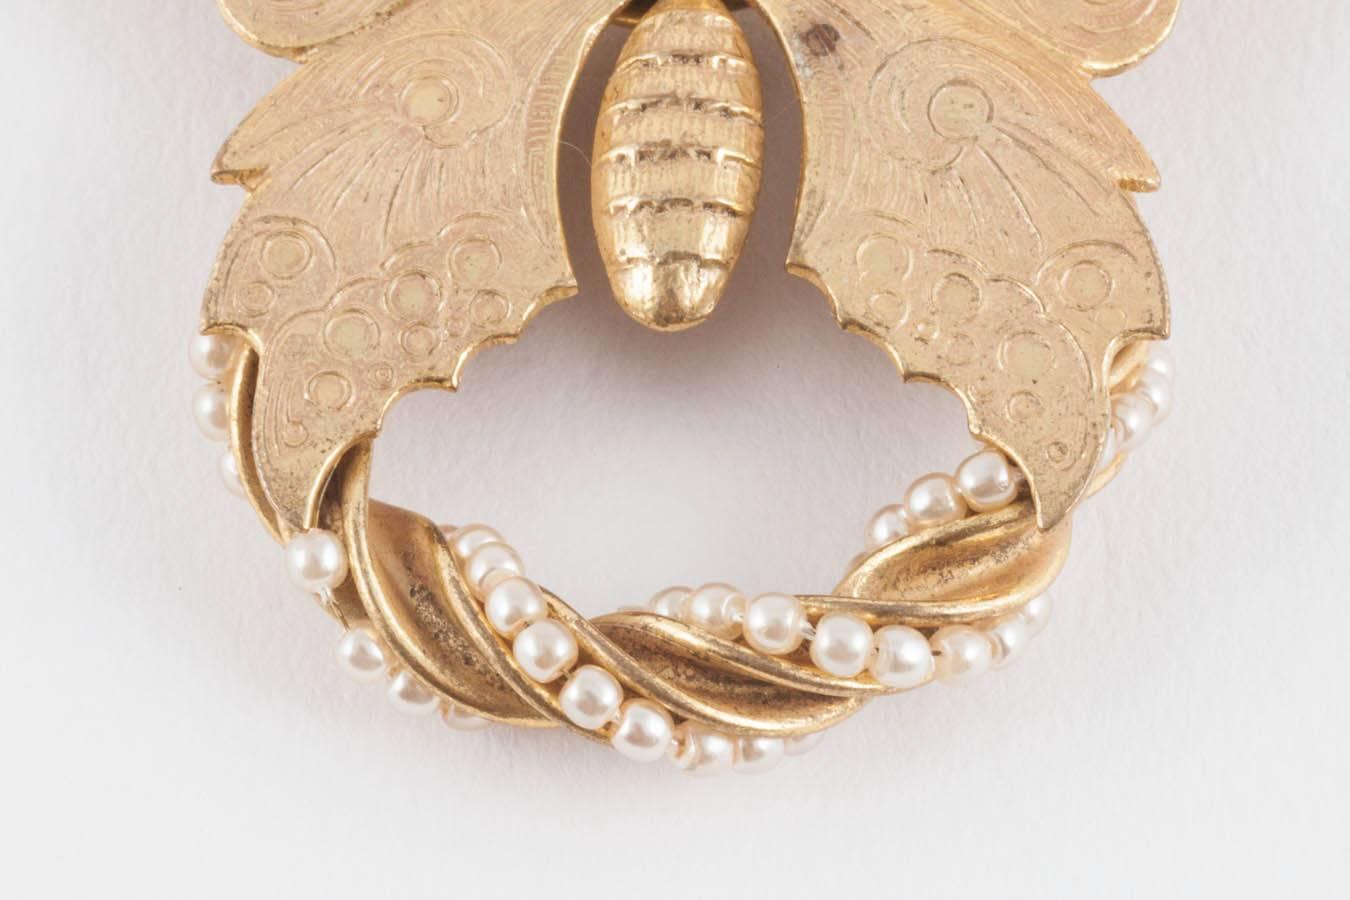 This such a fun quirky brooch, full of Miriam Haskell signature details. The gilding is a beautiful soft pale gold, and the pearl encrusted swag adds a bit of richness to the design. 
Miriam Haskell was born in 1899, opening her first boutique near